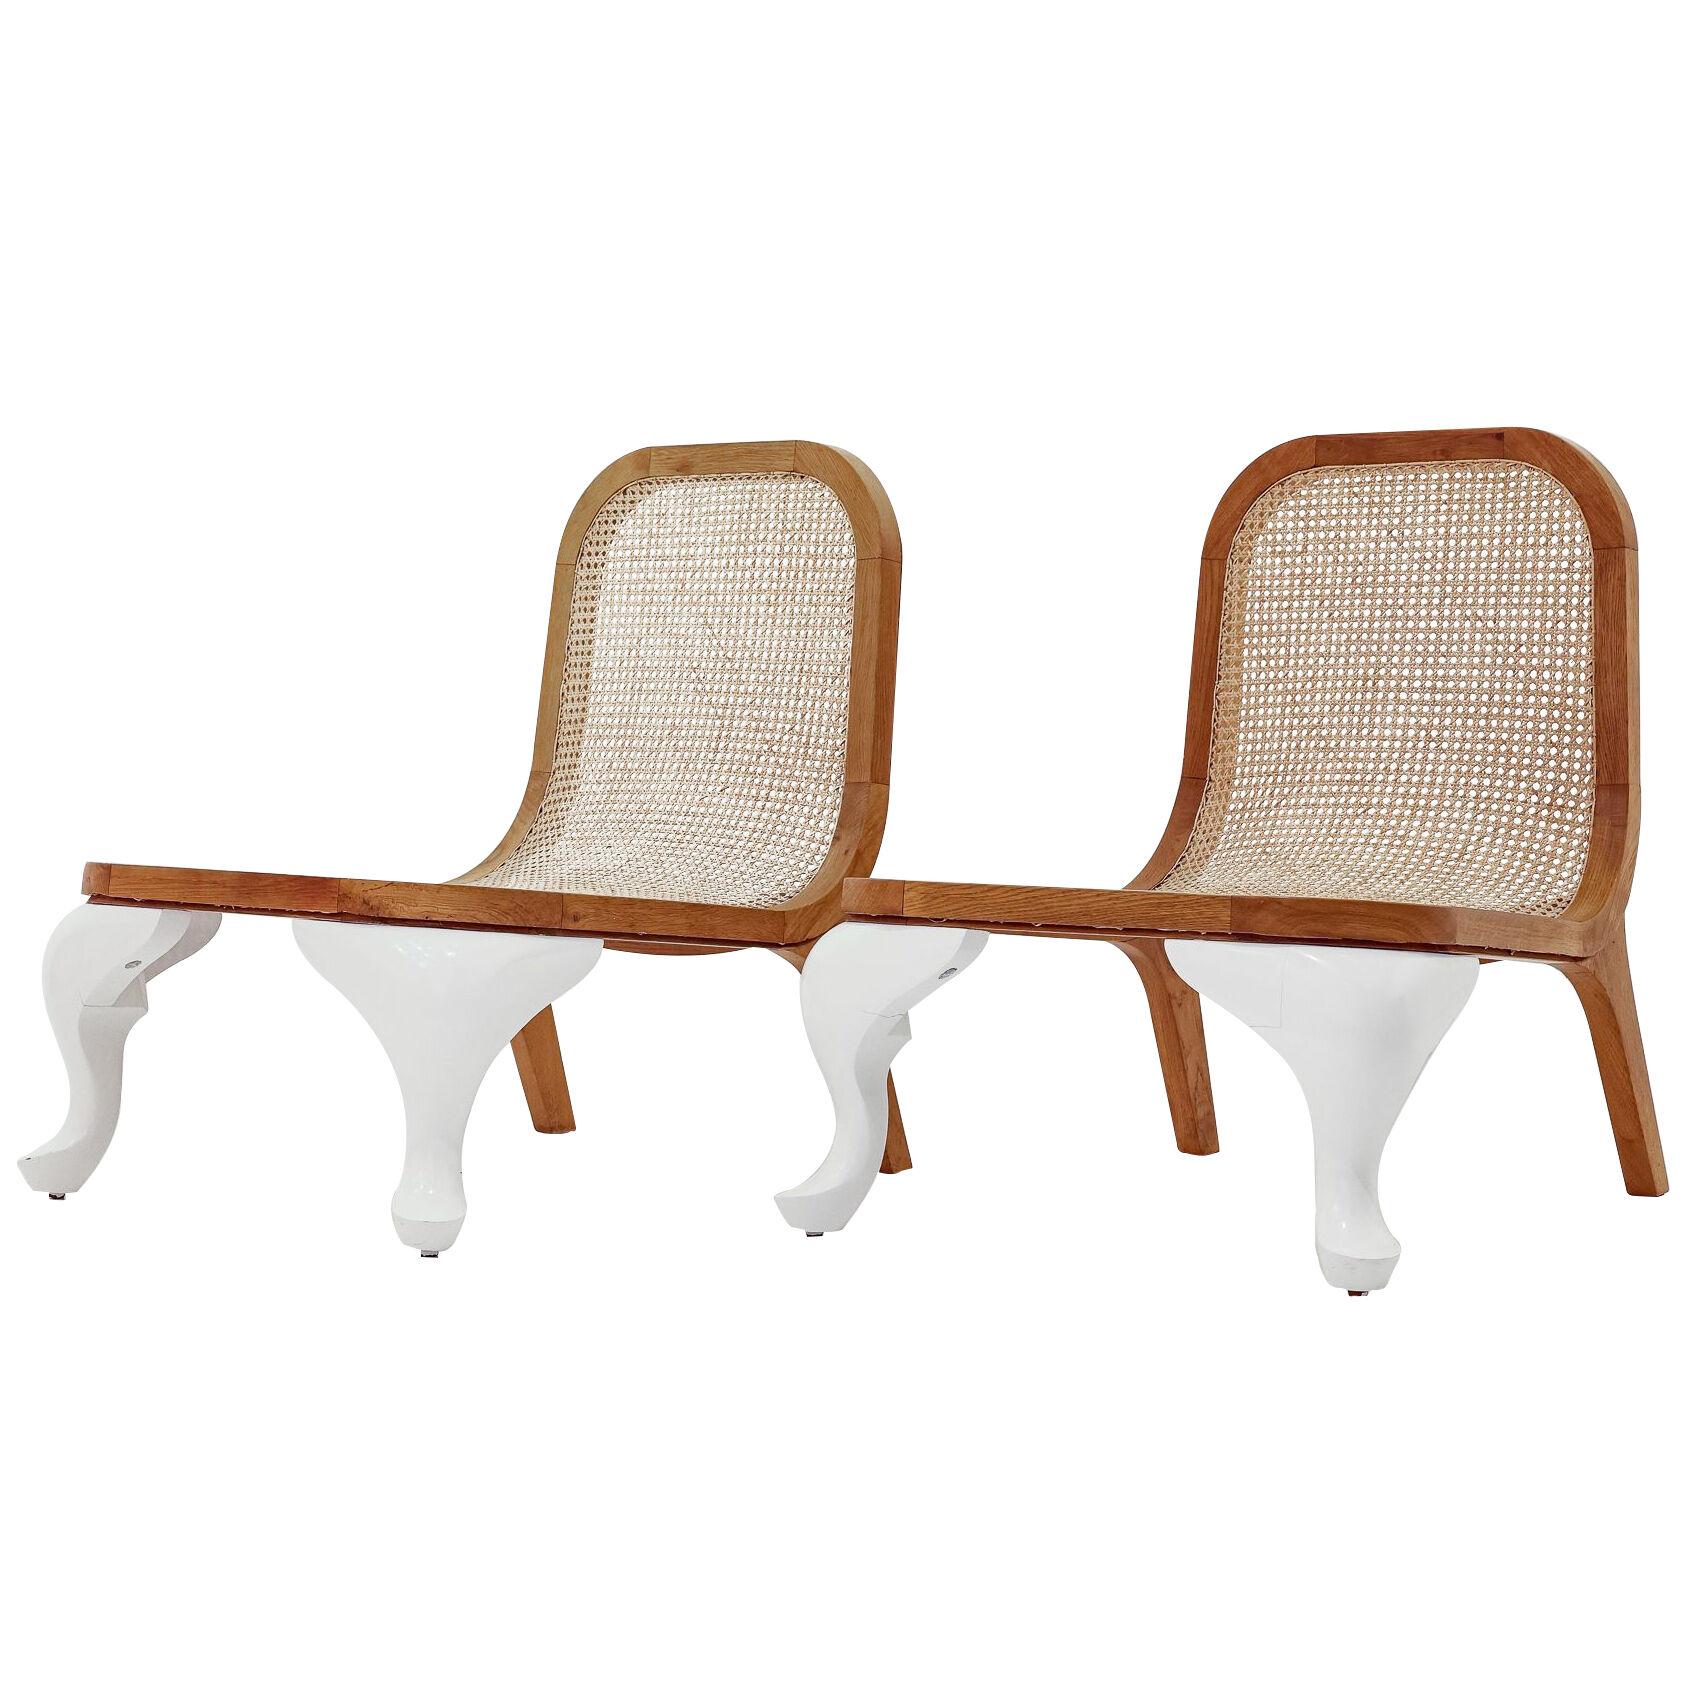 Unique Pair of Caned Slipper Chairs